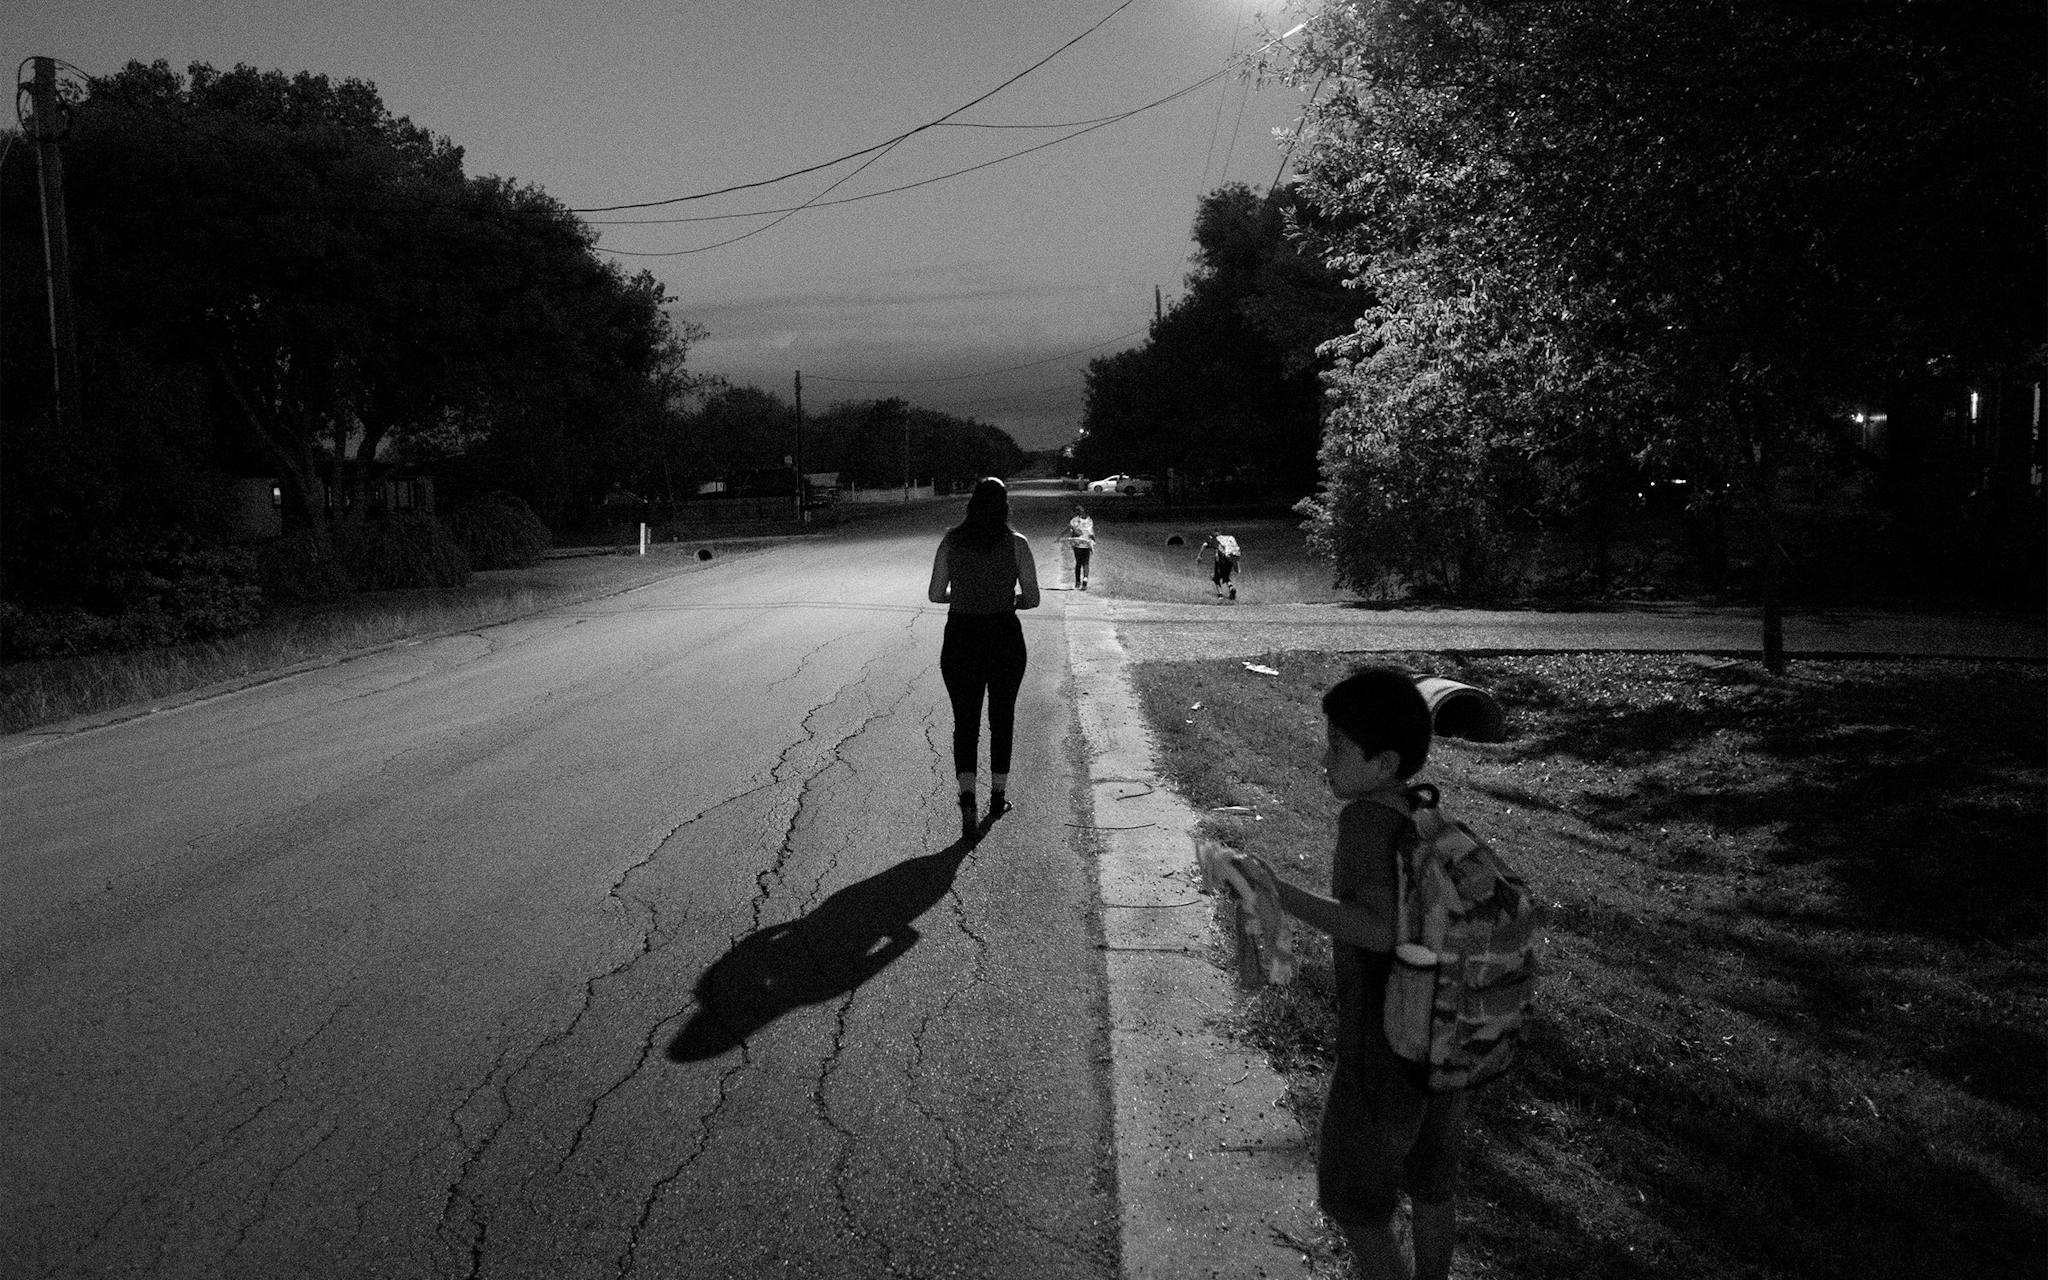 Arleen Juarez, Christian’s oldest sister, walks with her children, Diomani and Hailee Rivera, and her nephew, Dan Estrada, to the school bus pick-up before dawn in Kyle on September 27, 2019.